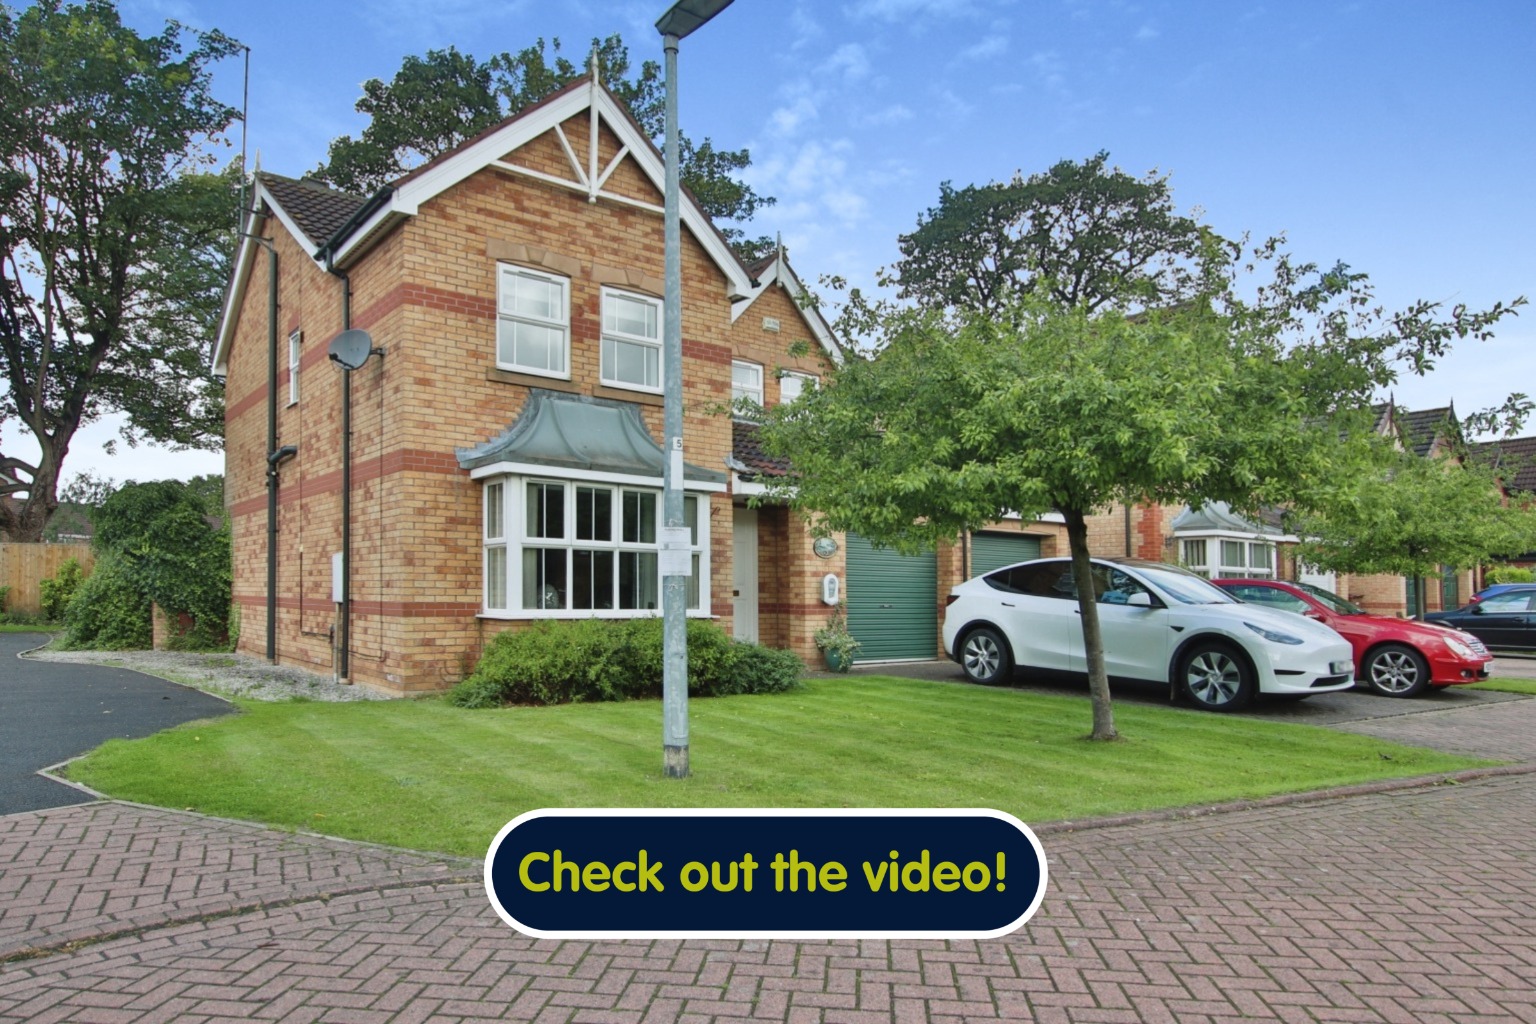 4 bed detached house for sale in Sage Close, Beverley - Property Image 1